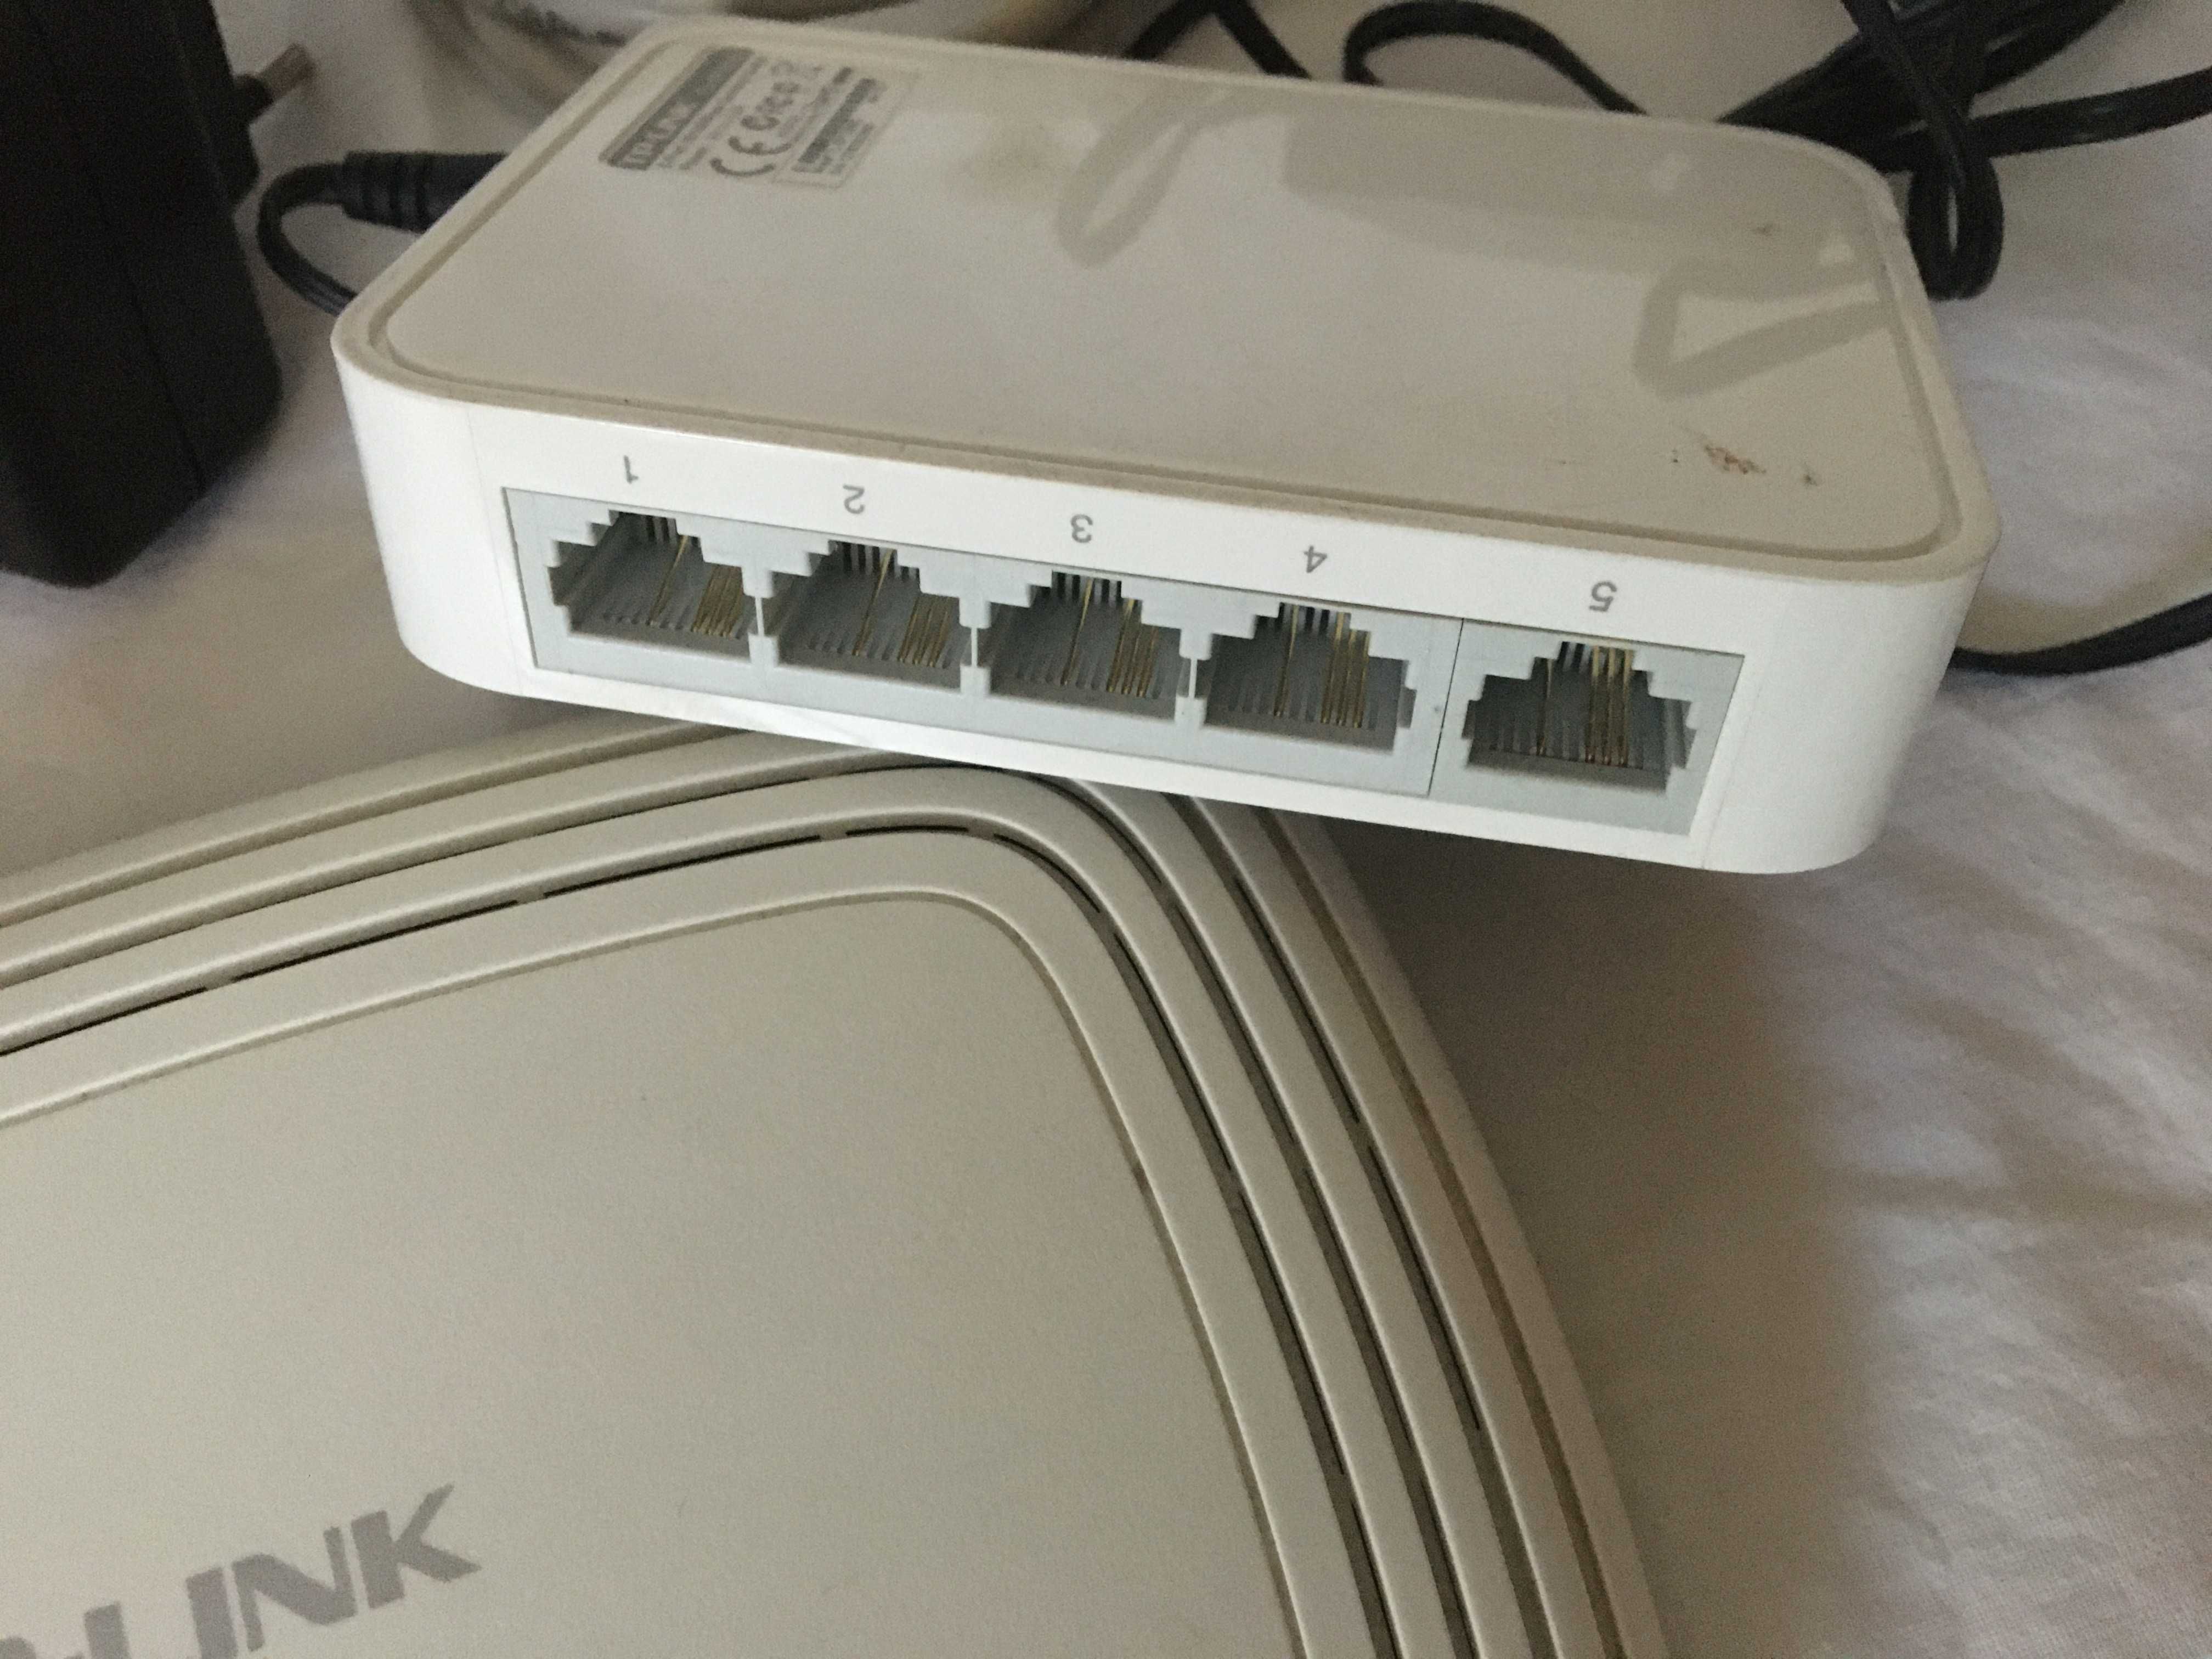 router tp link si accesorii